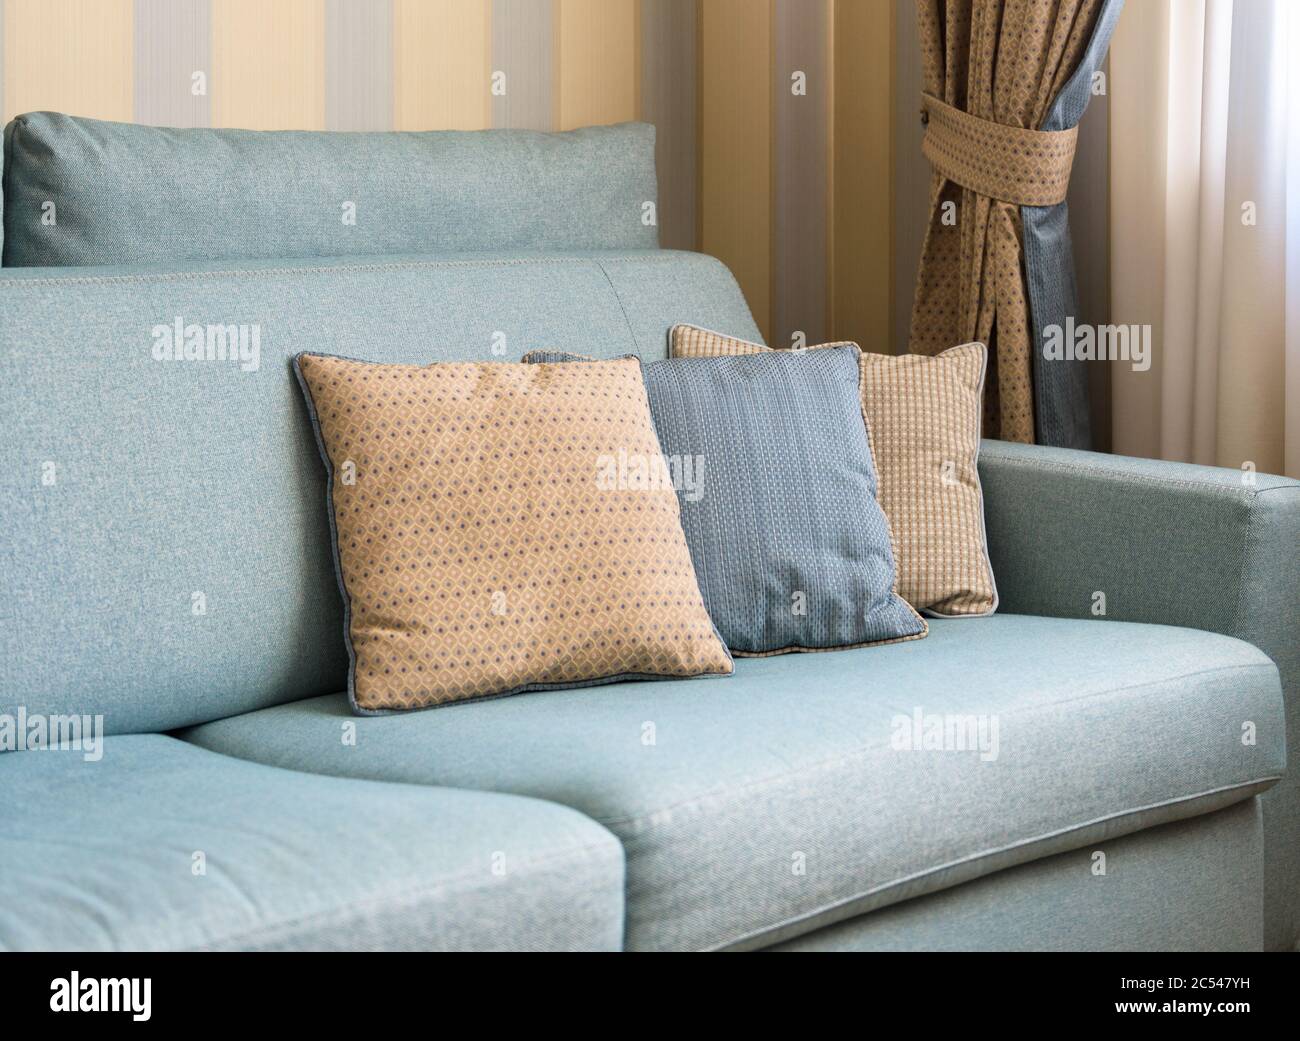 https://c8.alamy.com/comp/2C547YH/couch-or-sofa-with-cushions-in-the-home-interior-classic-couch-pillows-close-up-detail-of-the-pastel-interior-of-flat-in-daylight-2C547YH.jpg